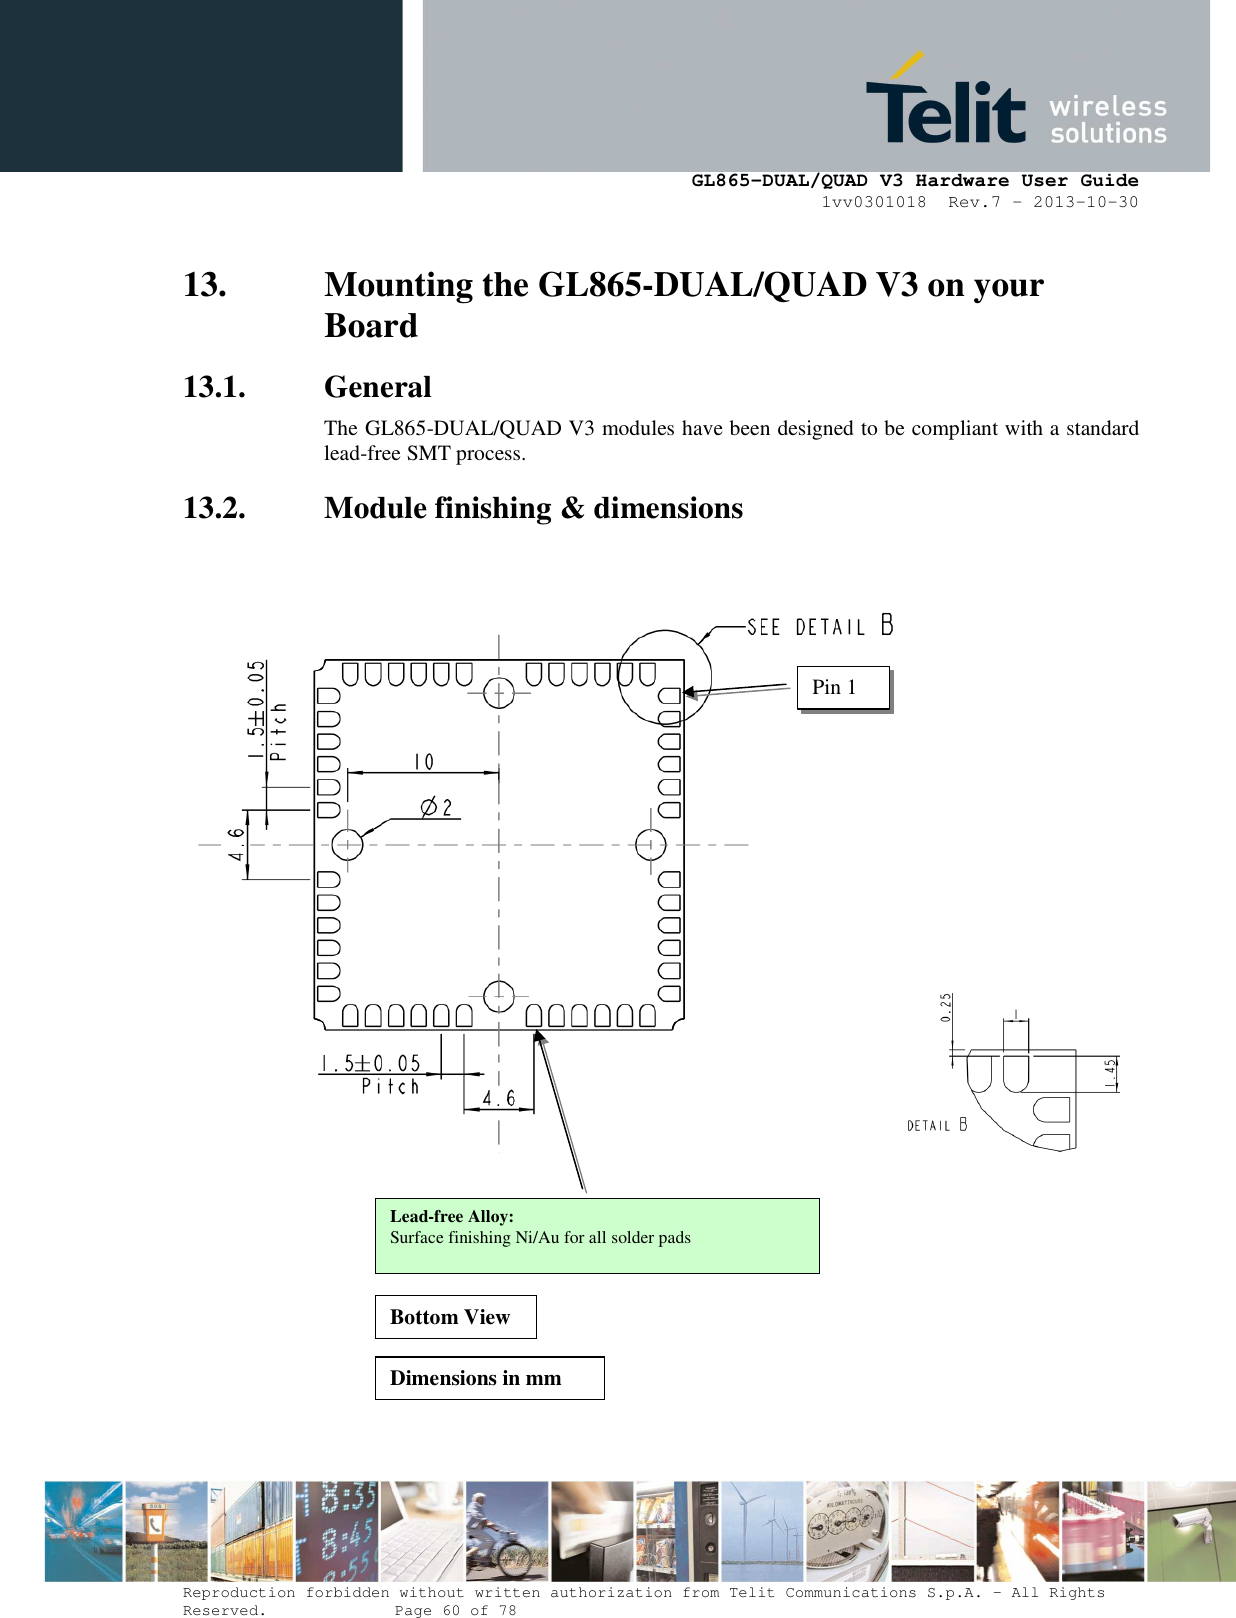      GL865-DUAL/QUAD V3 Hardware User Guide 1vv0301018  Rev.7 – 2013-10-30  Reproduction forbidden without written authorization from Telit Communications S.p.A. - All Rights Reserved.    Page 60 of 78 Mod. 0805 2011-07 Rev.2 13. Mounting the GL865-DUAL/QUAD V3 on your Board 13.1. General The GL865-DUAL/QUAD V3 modules have been designed to be compliant with a standard lead-free SMT process. 13.2. Module finishing &amp; dimensions   Pin 1 Lead-free Alloy: Surface finishing Ni/Au for all solder pads Bottom View Dimensions in mm 